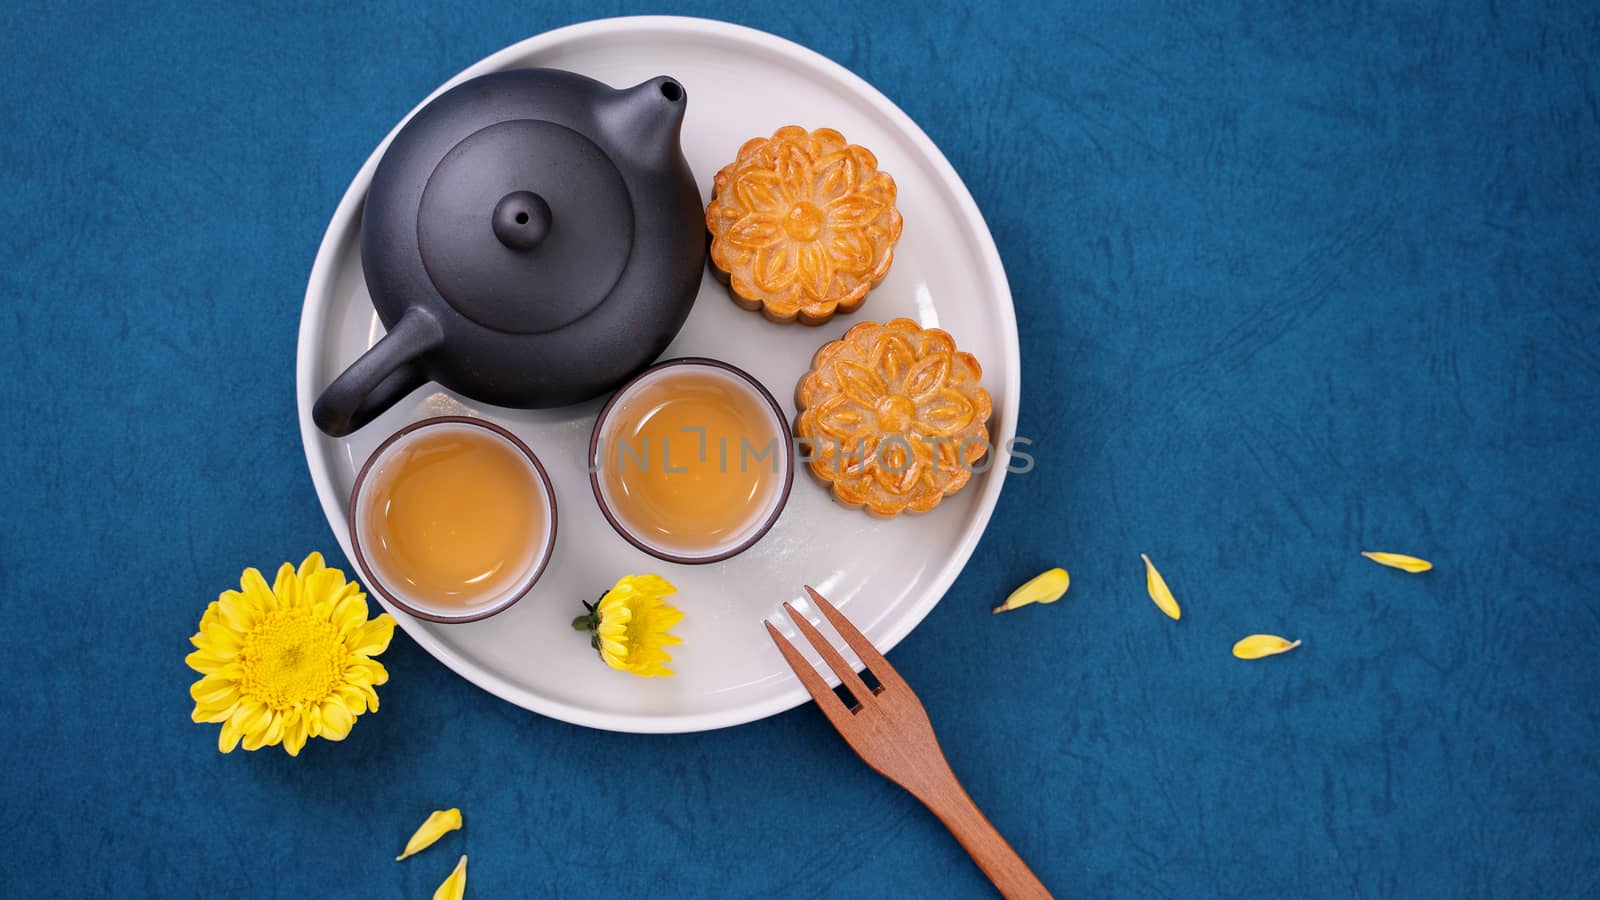 Moon cake for Mid-Autumn Festival, delicious beautiful fresh mooncake on a plate over blue background table, top view, flat lay layout design concept.